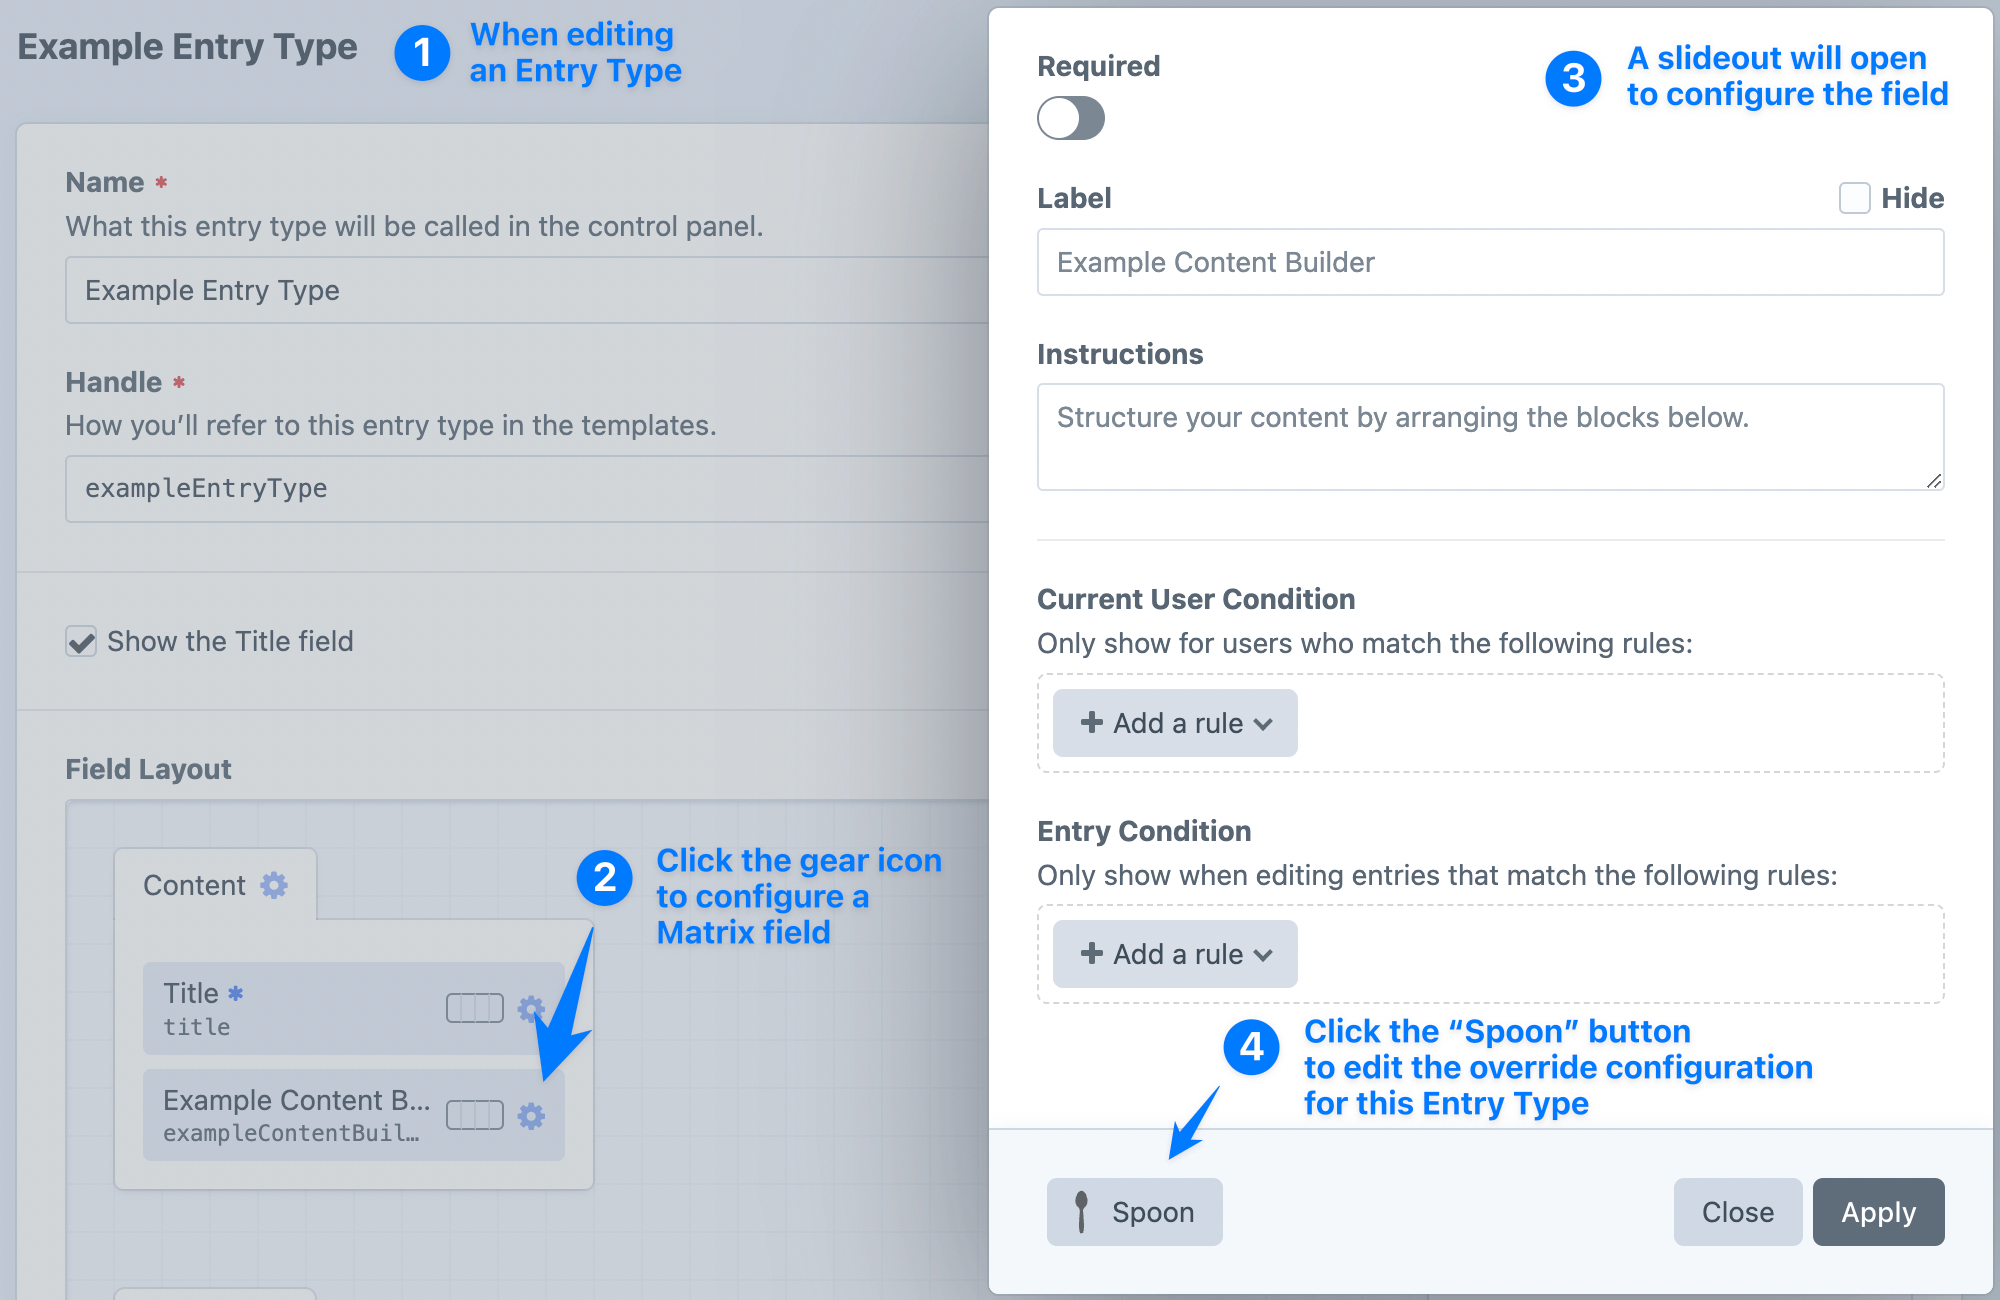 Screenshot showing steps to open an override editing modal